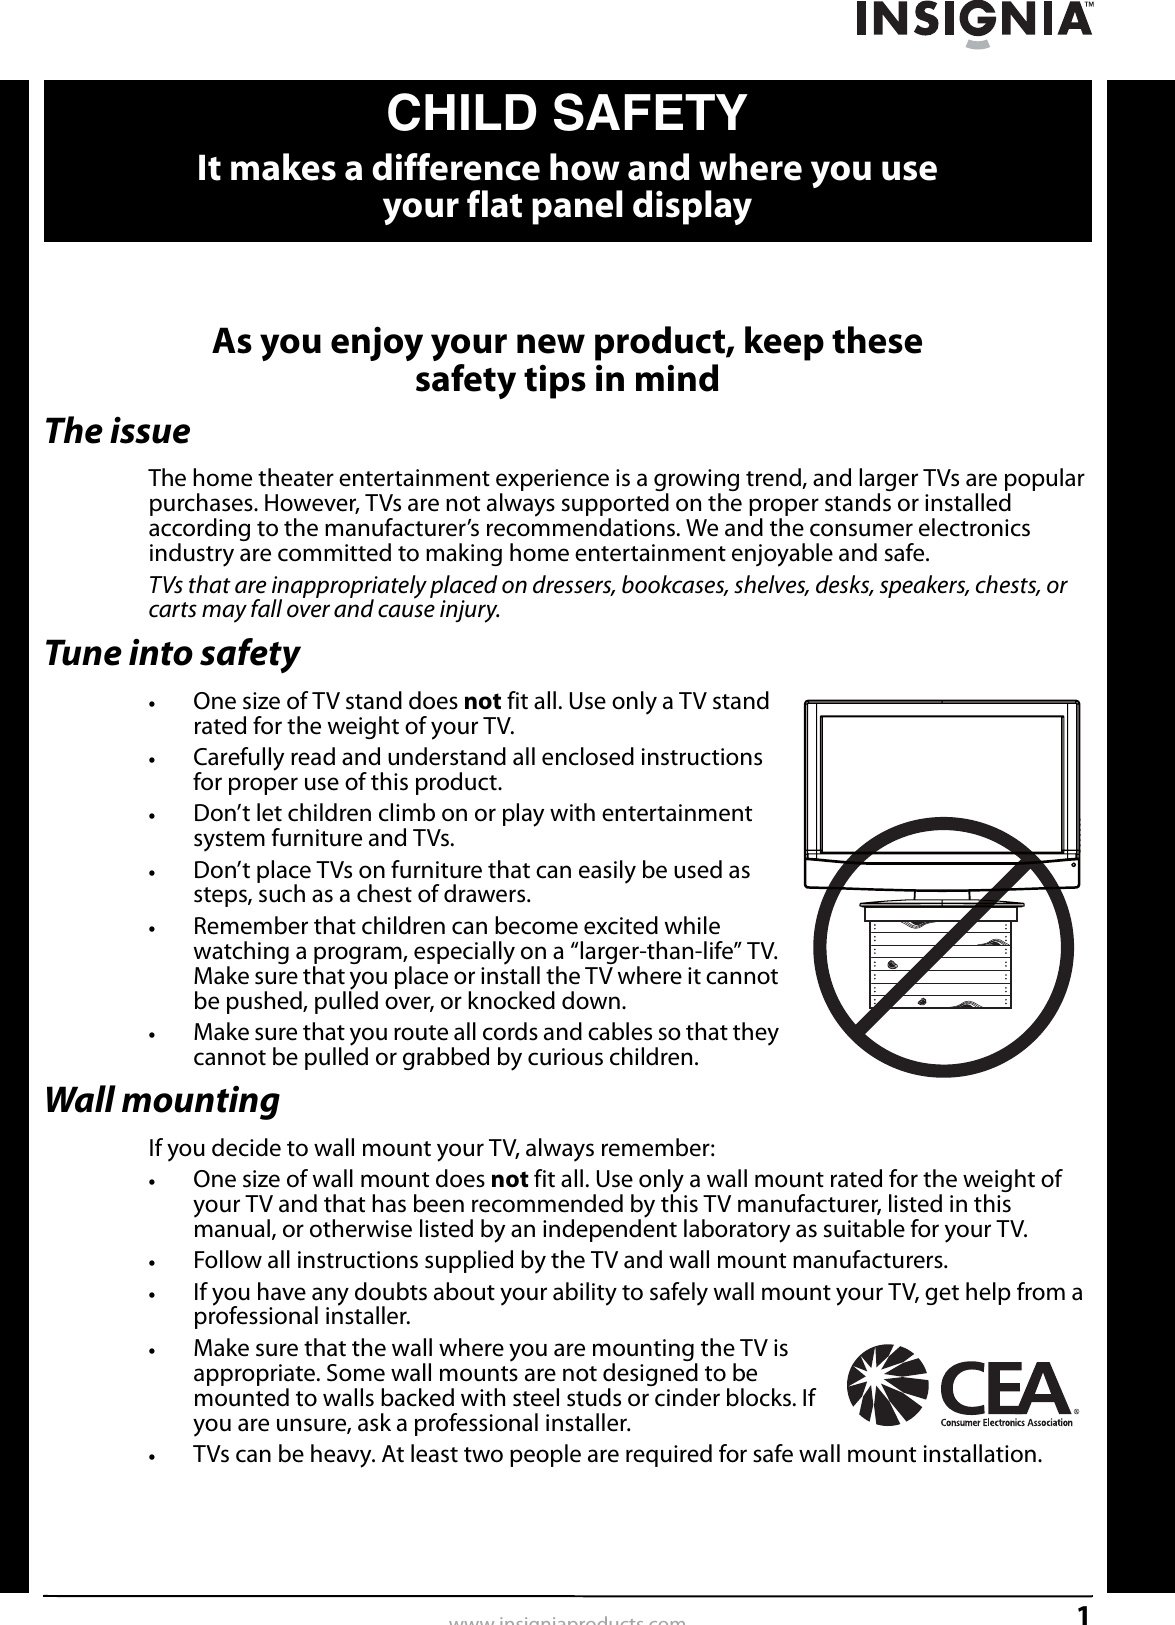 1www.insigniaproducts.comAs you enjoy your new product, keep these safety tips in mindThe issueThe home theater entertainment experience is a growing trend, and larger TVs are popular purchases. However, TVs are not always supported on the proper stands or installed according to the manufacturer’s recommendations. We and the consumer electronics industry are committed to making home entertainment enjoyable and safe.TVs that are inappropriately placed on dressers, bookcases, shelves, desks, speakers, chests, or carts may fall over and cause injury.Tune into safety•One size of TV stand does not fit all. Use only a TV stand rated for the weight of your TV.•Carefully read and understand all enclosed instructions for proper use of this product.•Don’t let children climb on or play with entertainment system furniture and TVs.•Don’t place TVs on furniture that can easily be used as steps, such as a chest of drawers.•Remember that children can become excited while watching a program, especially on a “larger-than-life” TV. Make sure that you place or install the TV where it cannot be pushed, pulled over, or knocked down.•Make sure that you route all cords and cables so that they cannot be pulled or grabbed by curious children.Wall mountingIf you decide to wall mount your TV, always remember:•One size of wall mount does not fit all. Use only a wall mount rated for the weight of your TV and that has been recommended by this TV manufacturer, listed in this manual, or otherwise listed by an independent laboratory as suitable for your TV.•Follow all instructions supplied by the TV and wall mount manufacturers.•If you have any doubts about your ability to safely wall mount your TV, get help from a professional installer.•Make sure that the wall where you are mounting the TV is appropriate. Some wall mounts are not designed to be mounted to walls backed with steel studs or cinder blocks. If you are unsure, ask a professional installer.•TVs can be heavy. At least two people are required for safe wall mount installation.fCHILD SAFETYIt makes a difference how and where you use your flat panel display